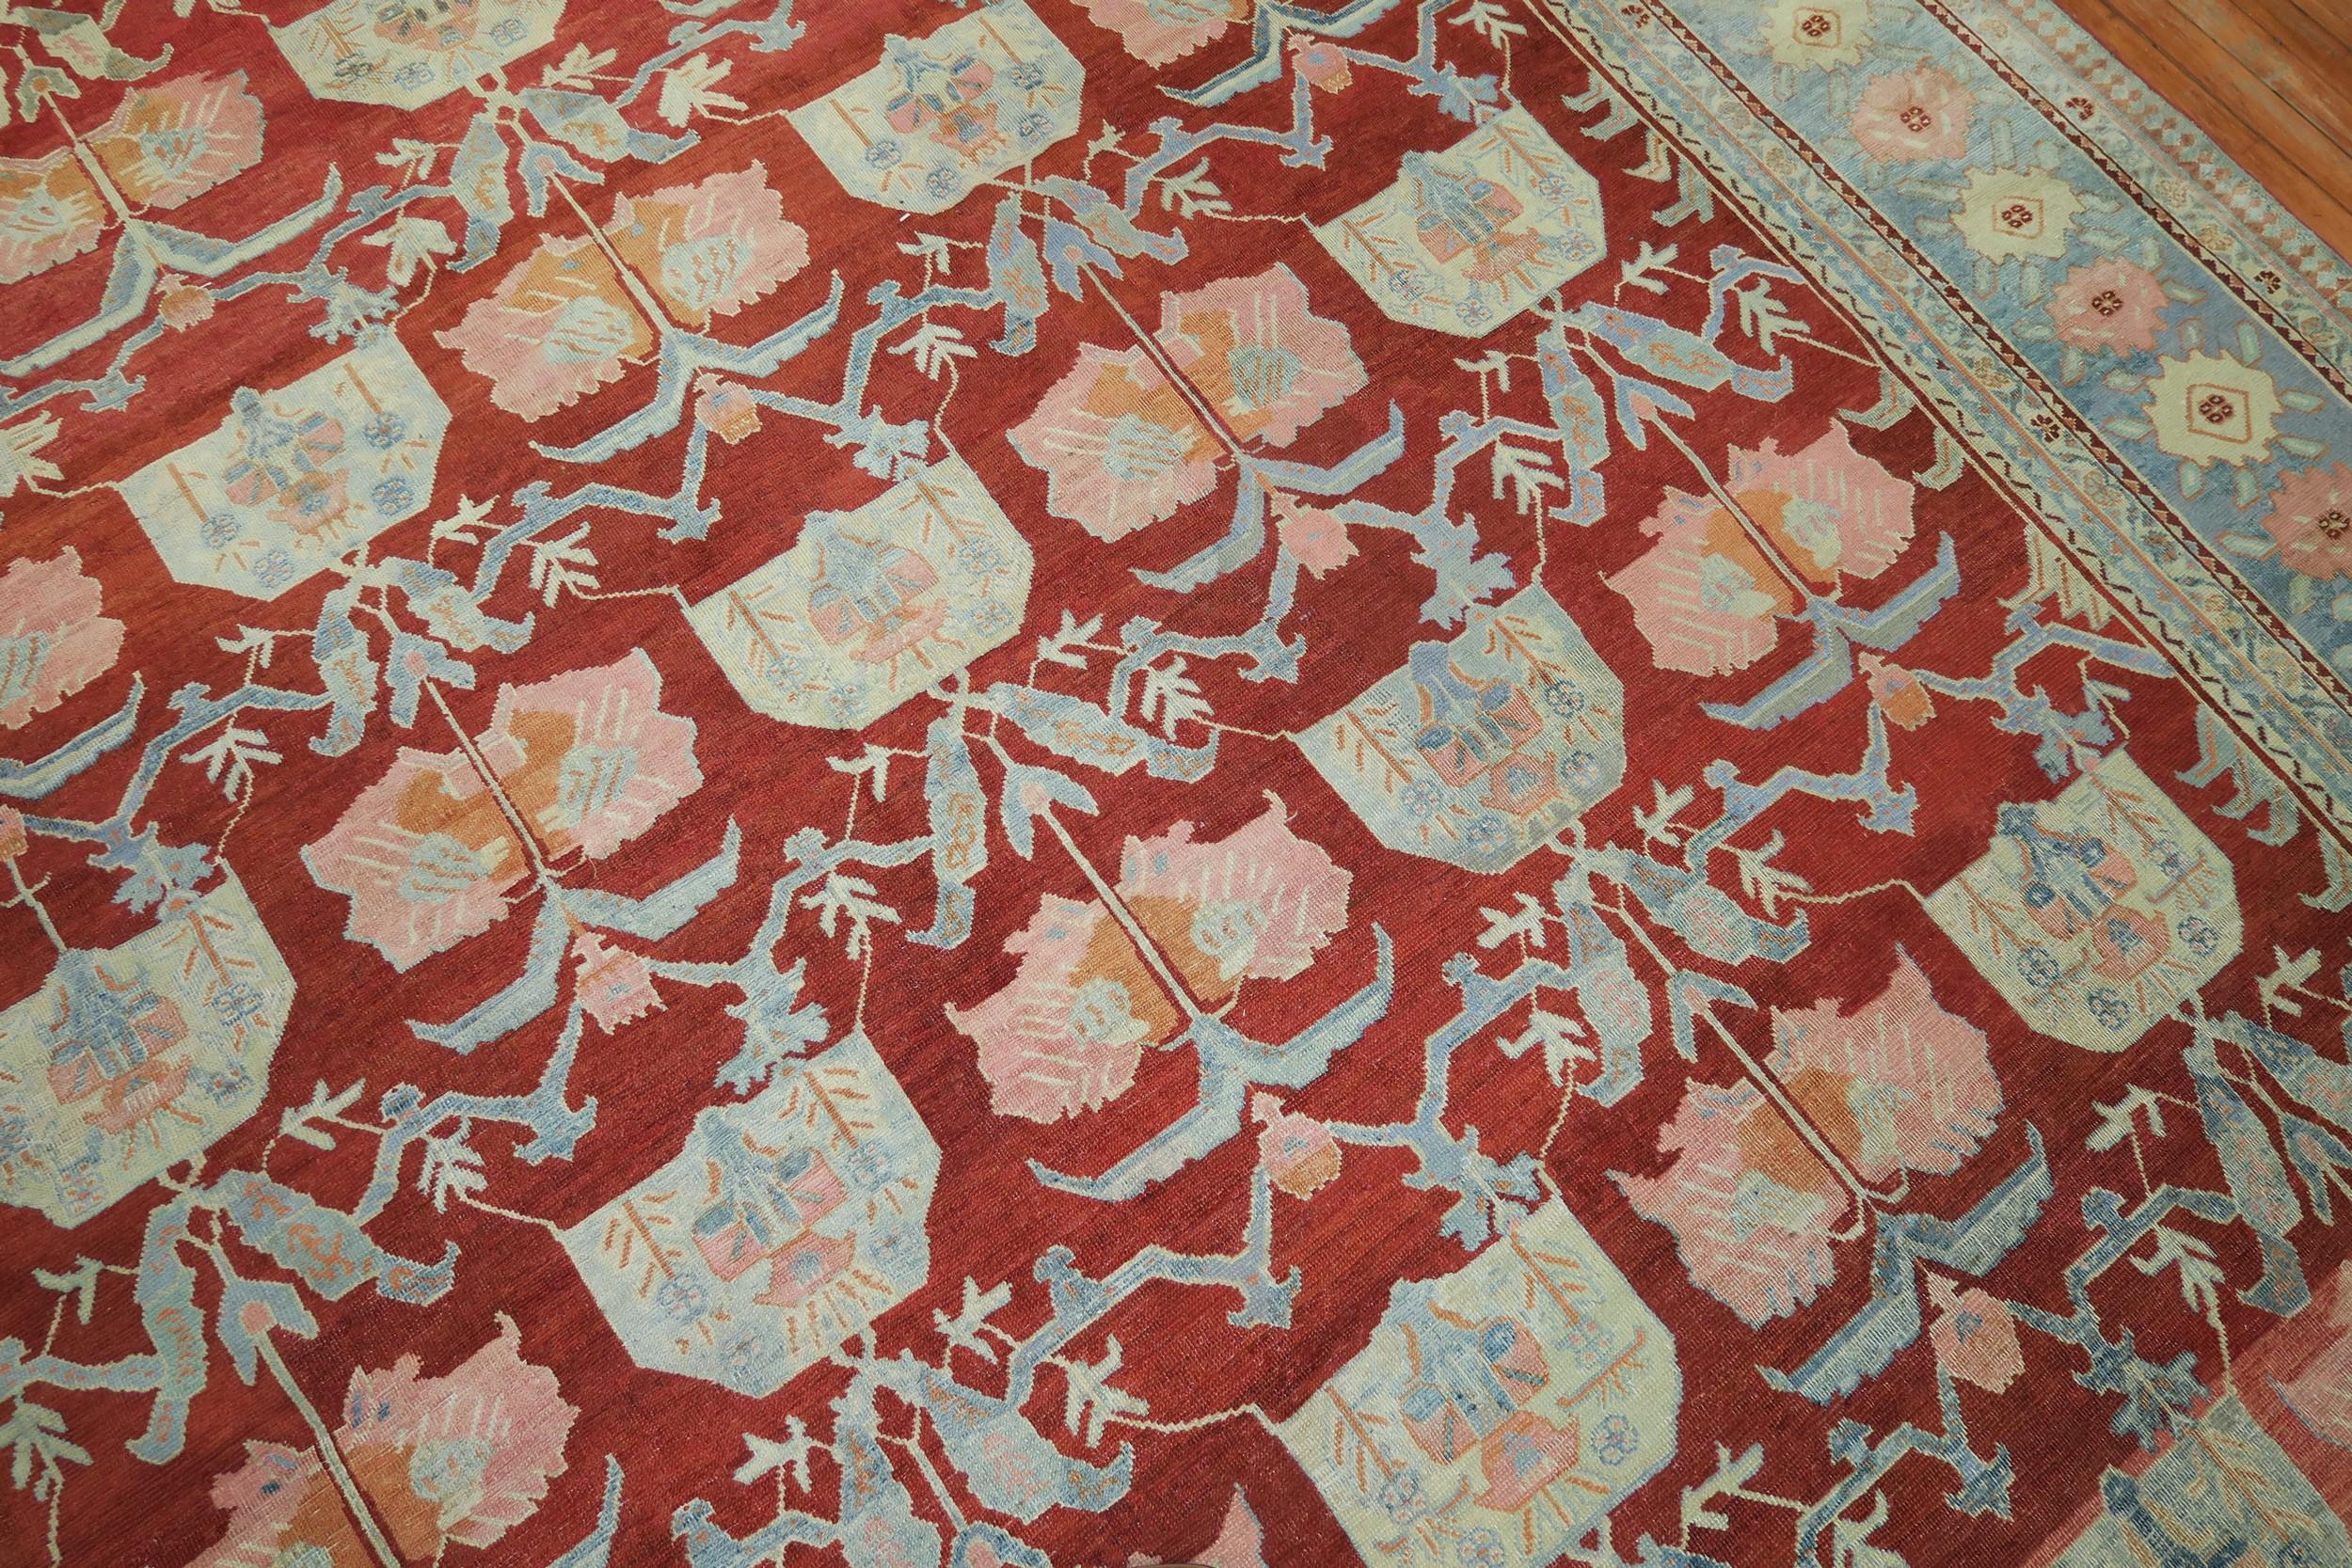 Fine quality Northwest Persian rug with a floral all-over design set on a tomato red field, accents in hot pink, gray and apricot, and a light blue border

Measures: 10'1” x 13'5”.